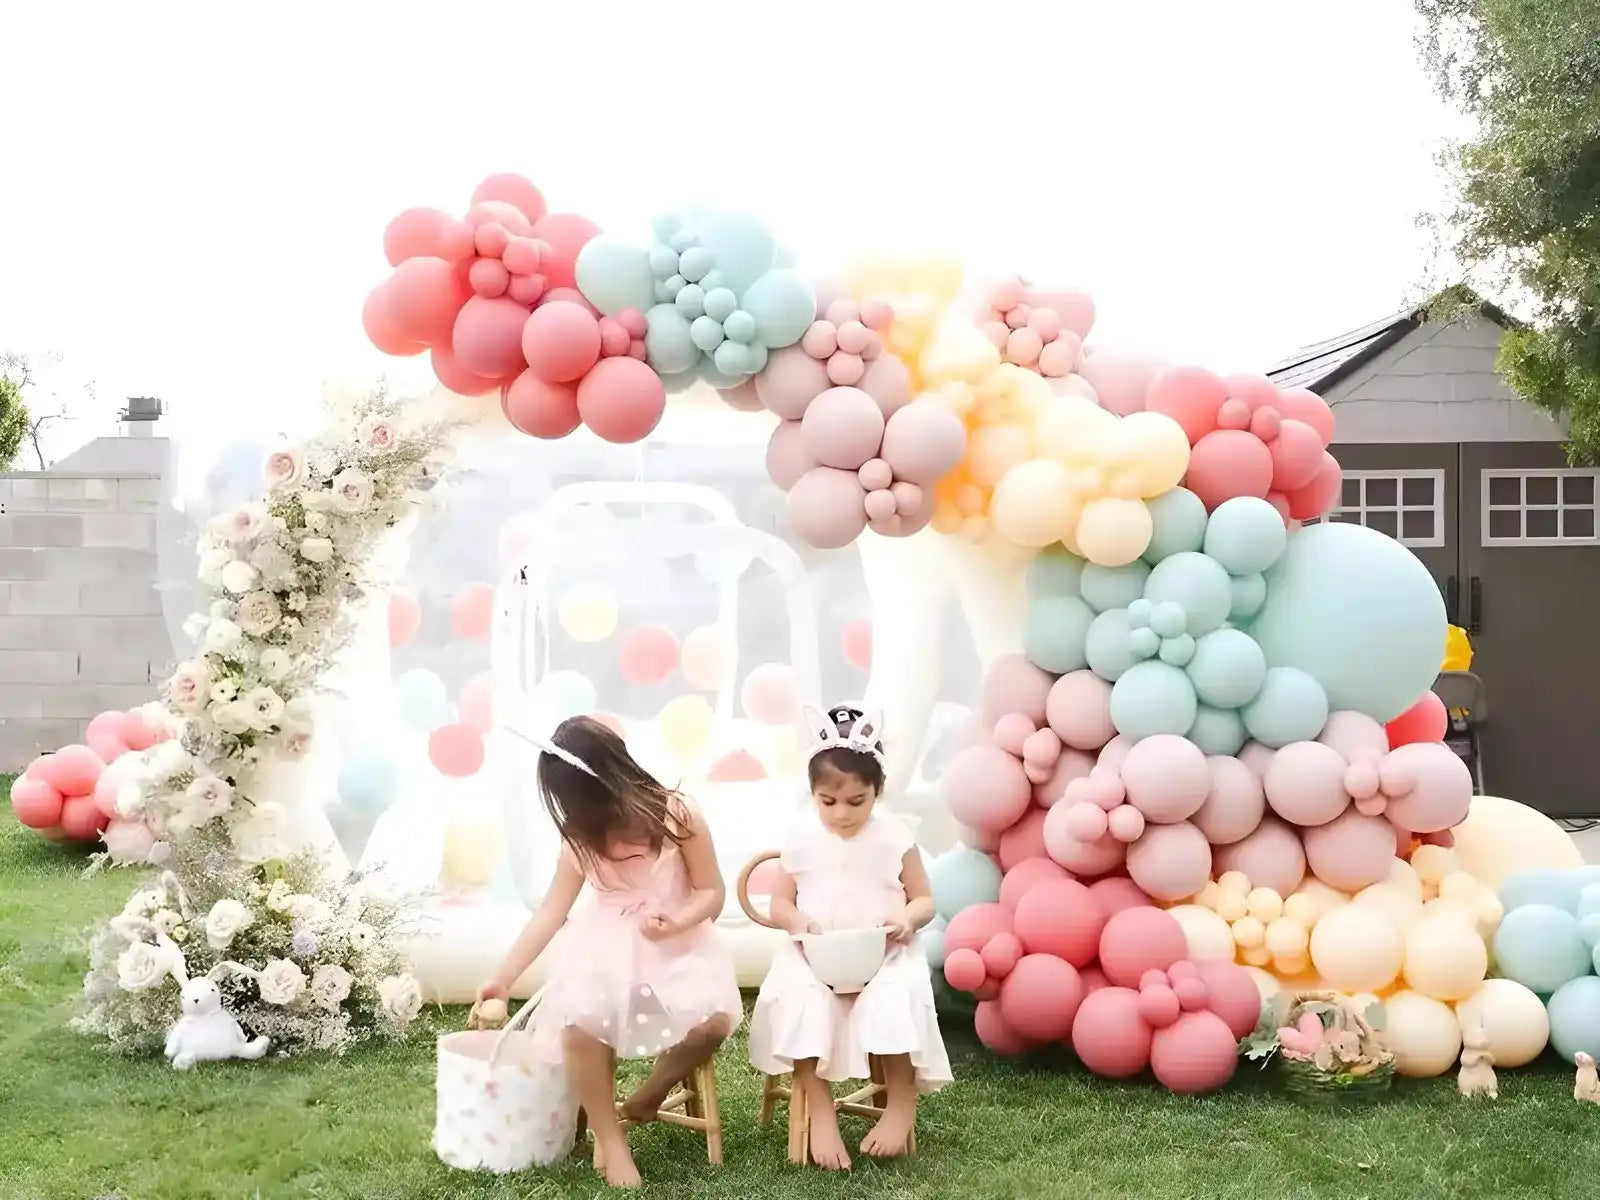 The Bubble House, transparent inflatable bubble tent, decorated with beautiful balloons in the backyard with kids posing in front